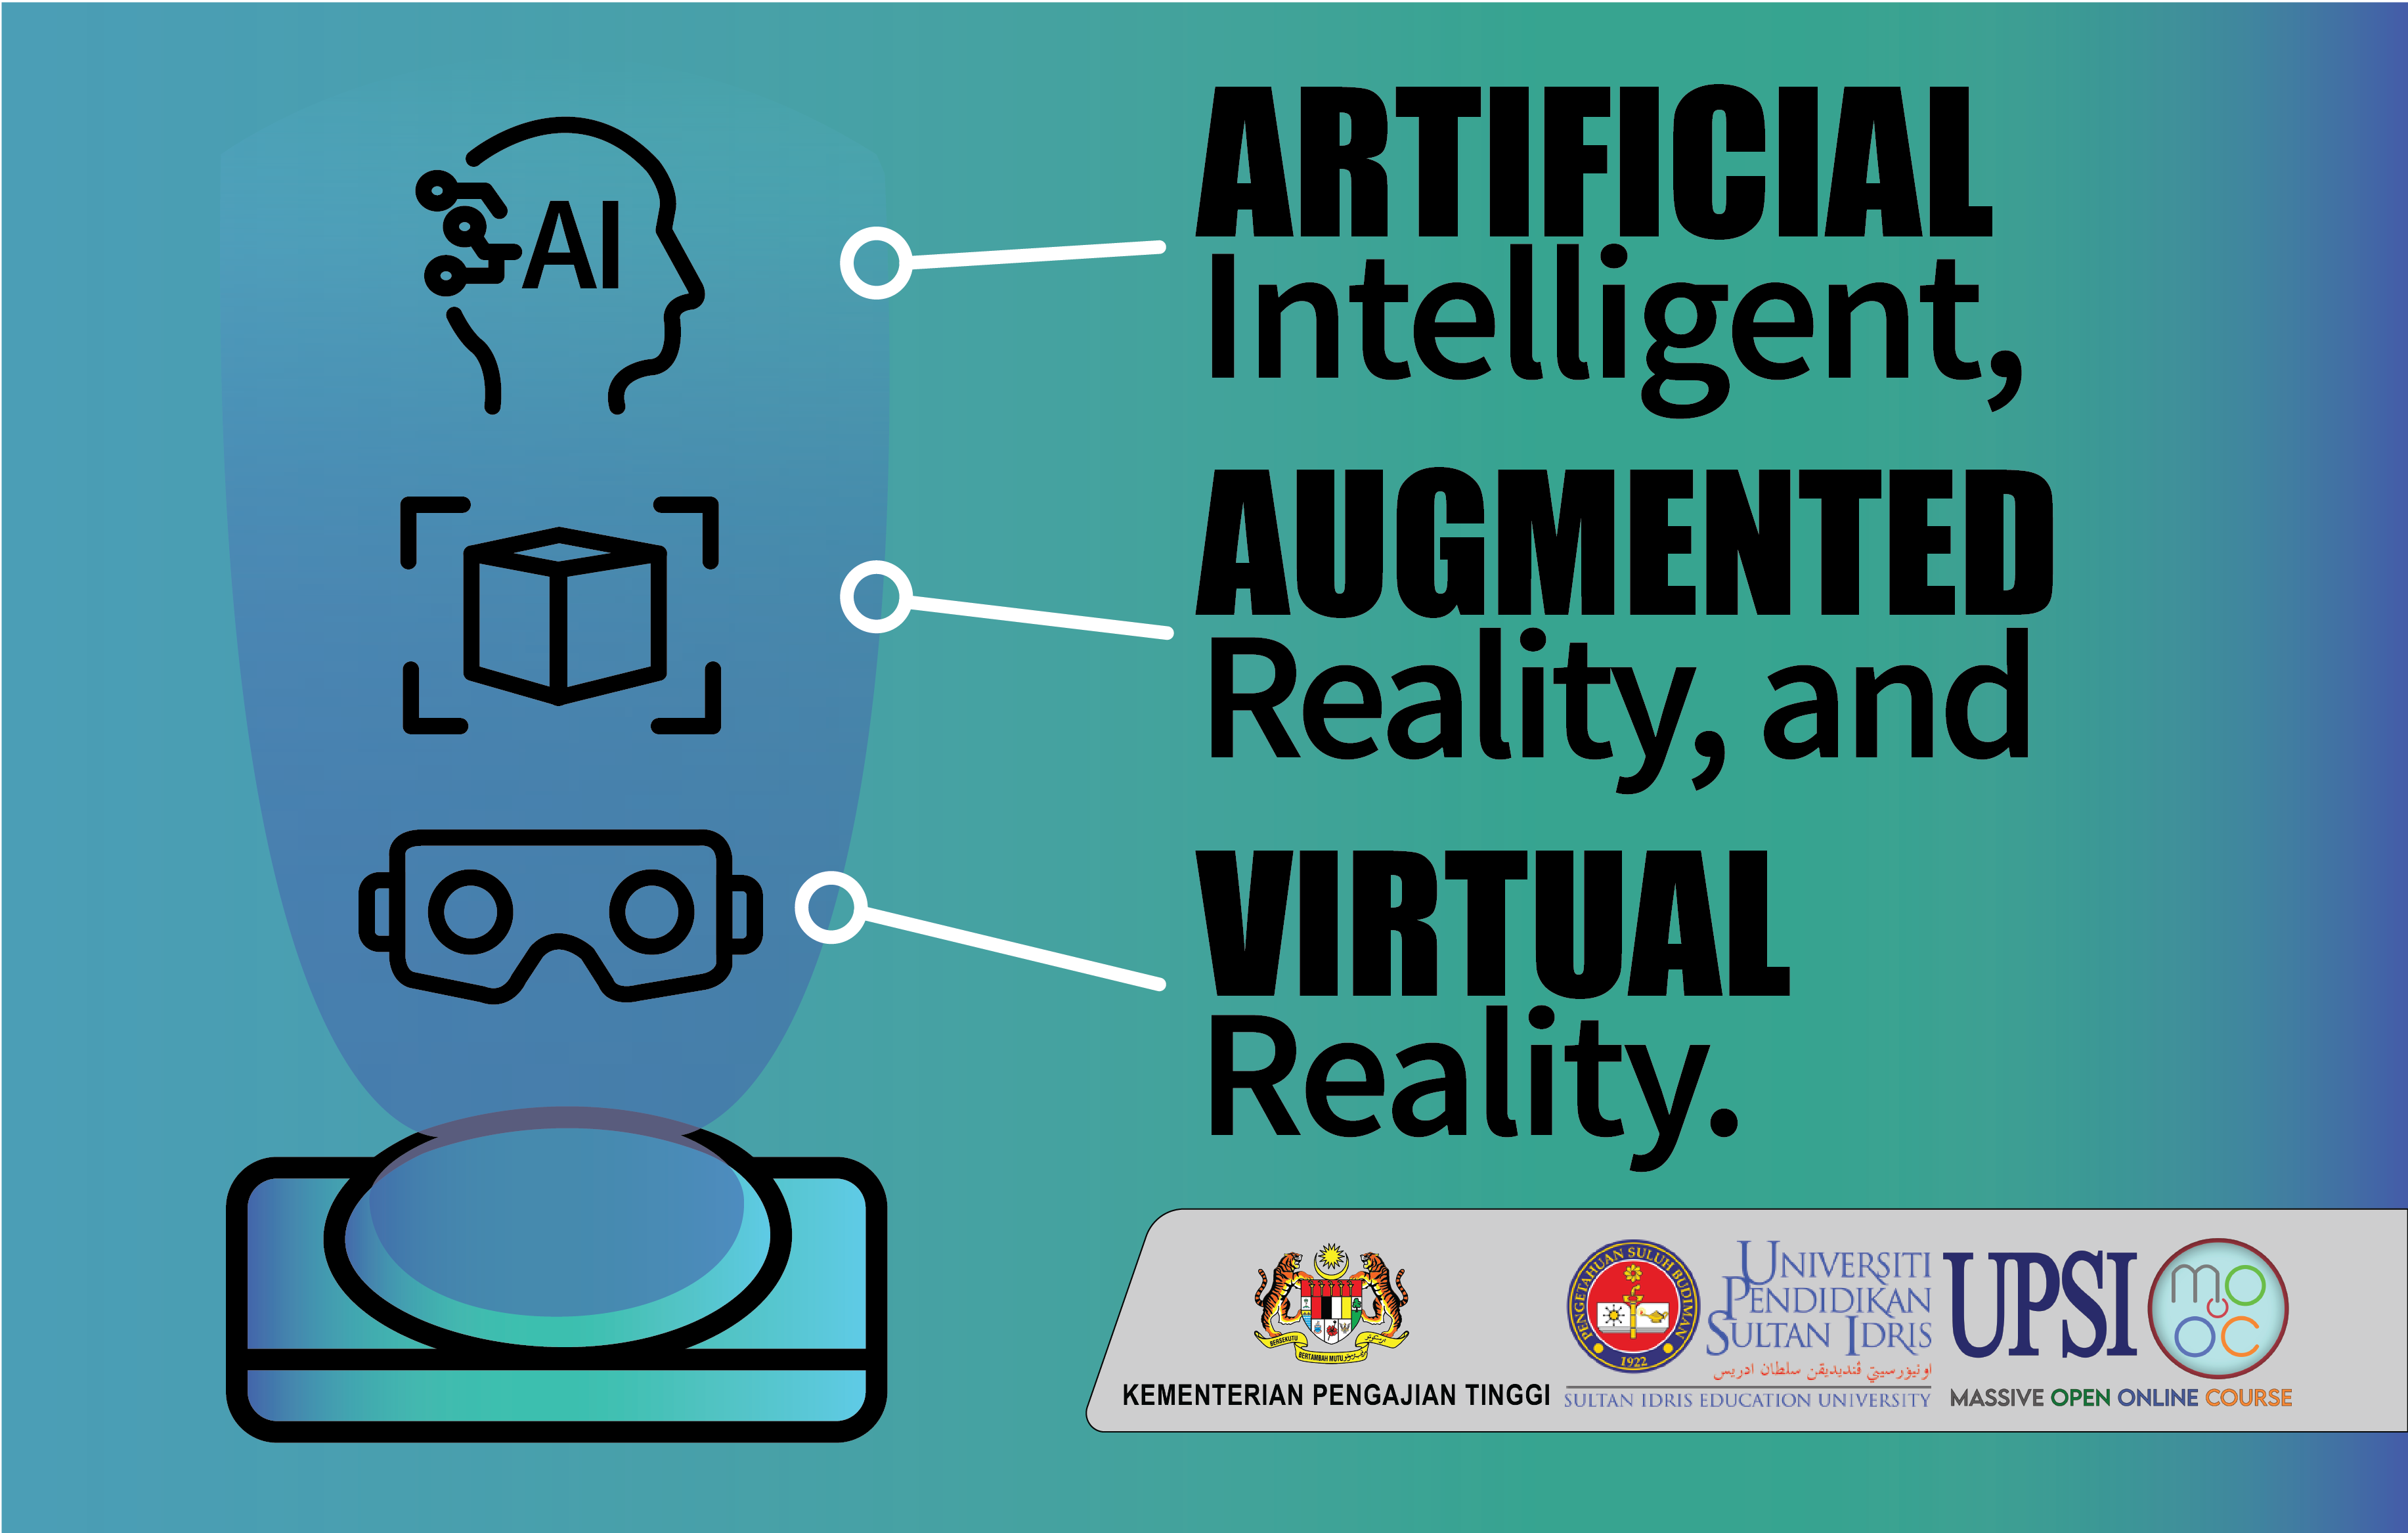 Artificial Intelligent, Augmented Reality and Virtual Reality